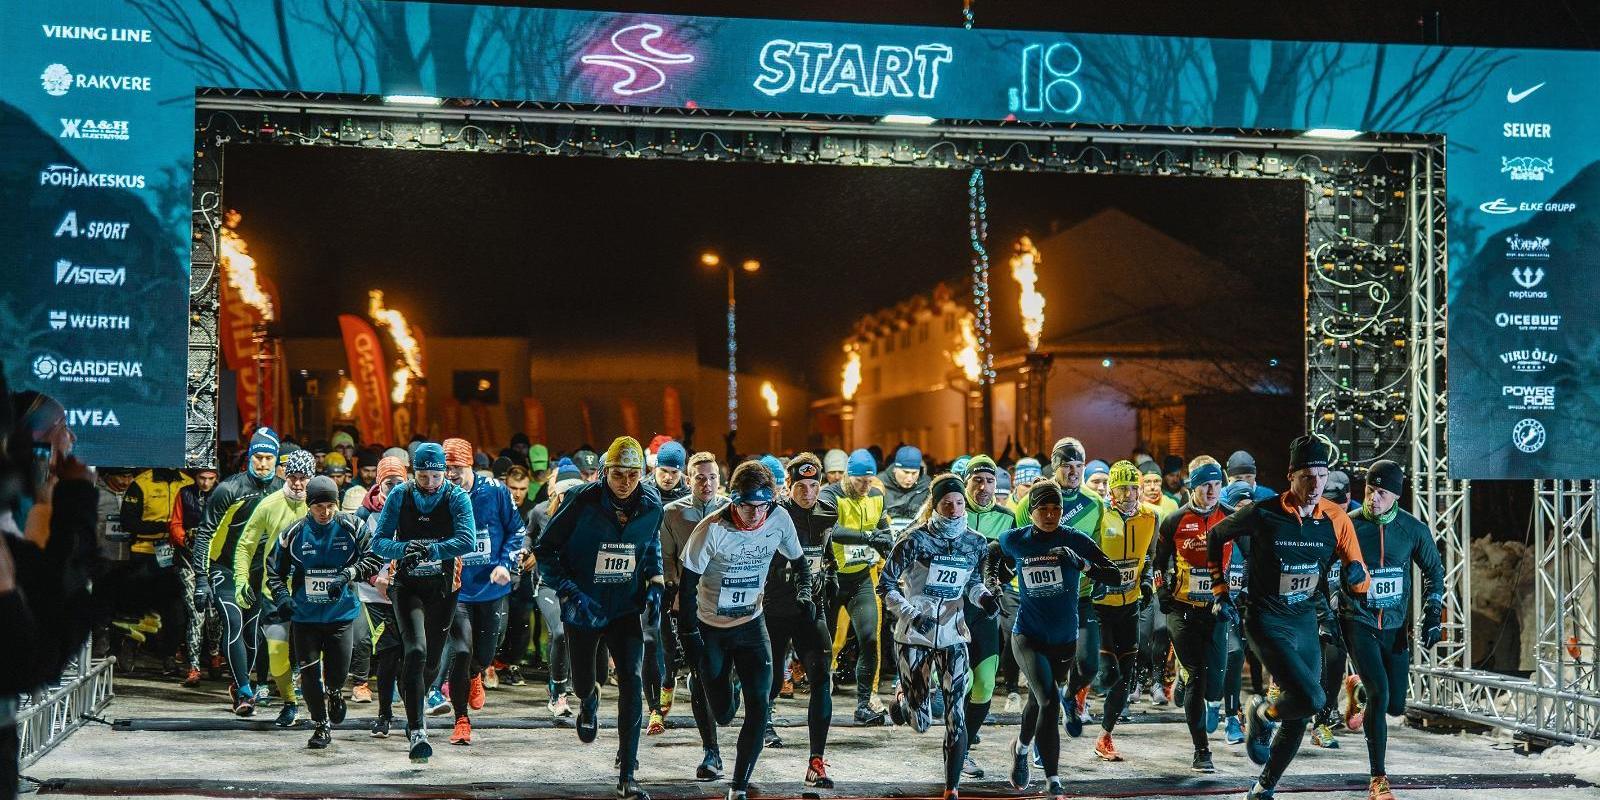 Before the Christmas season and before New Year’s Eve, you can participate in both the 5 km and the 10 km run in Narva. Fireworks, the city’s Christma